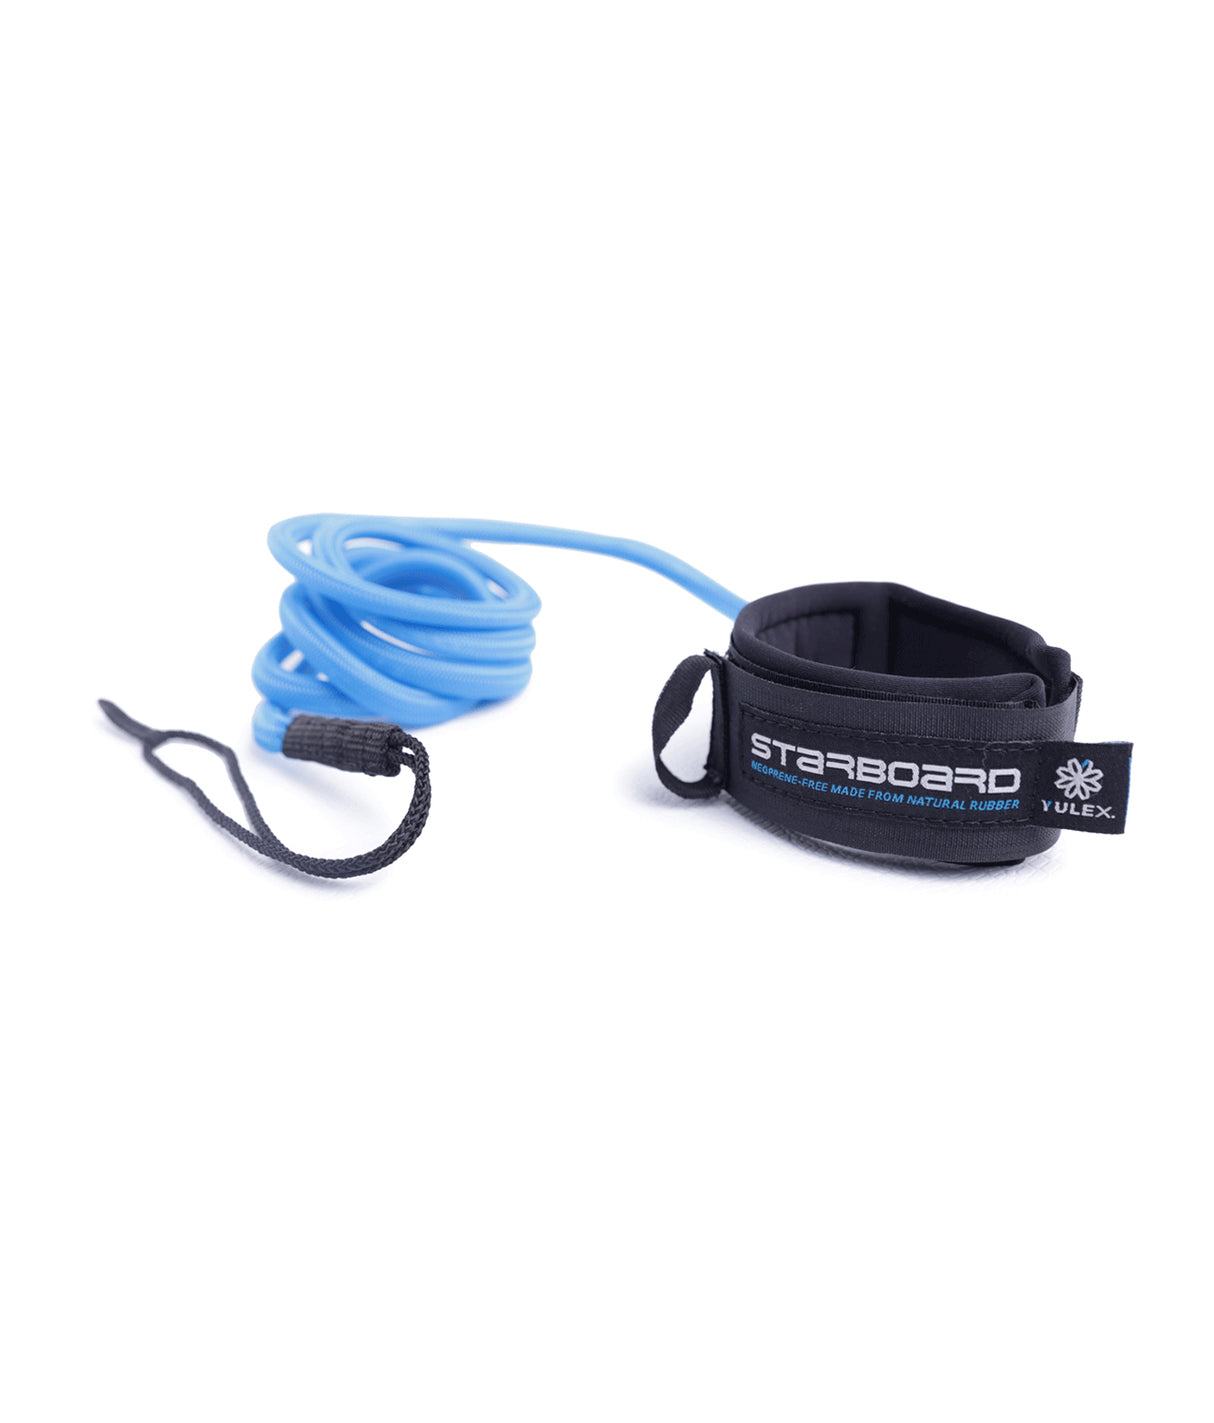 starboard 12'6" inflatable touring deluxe sc sup leash